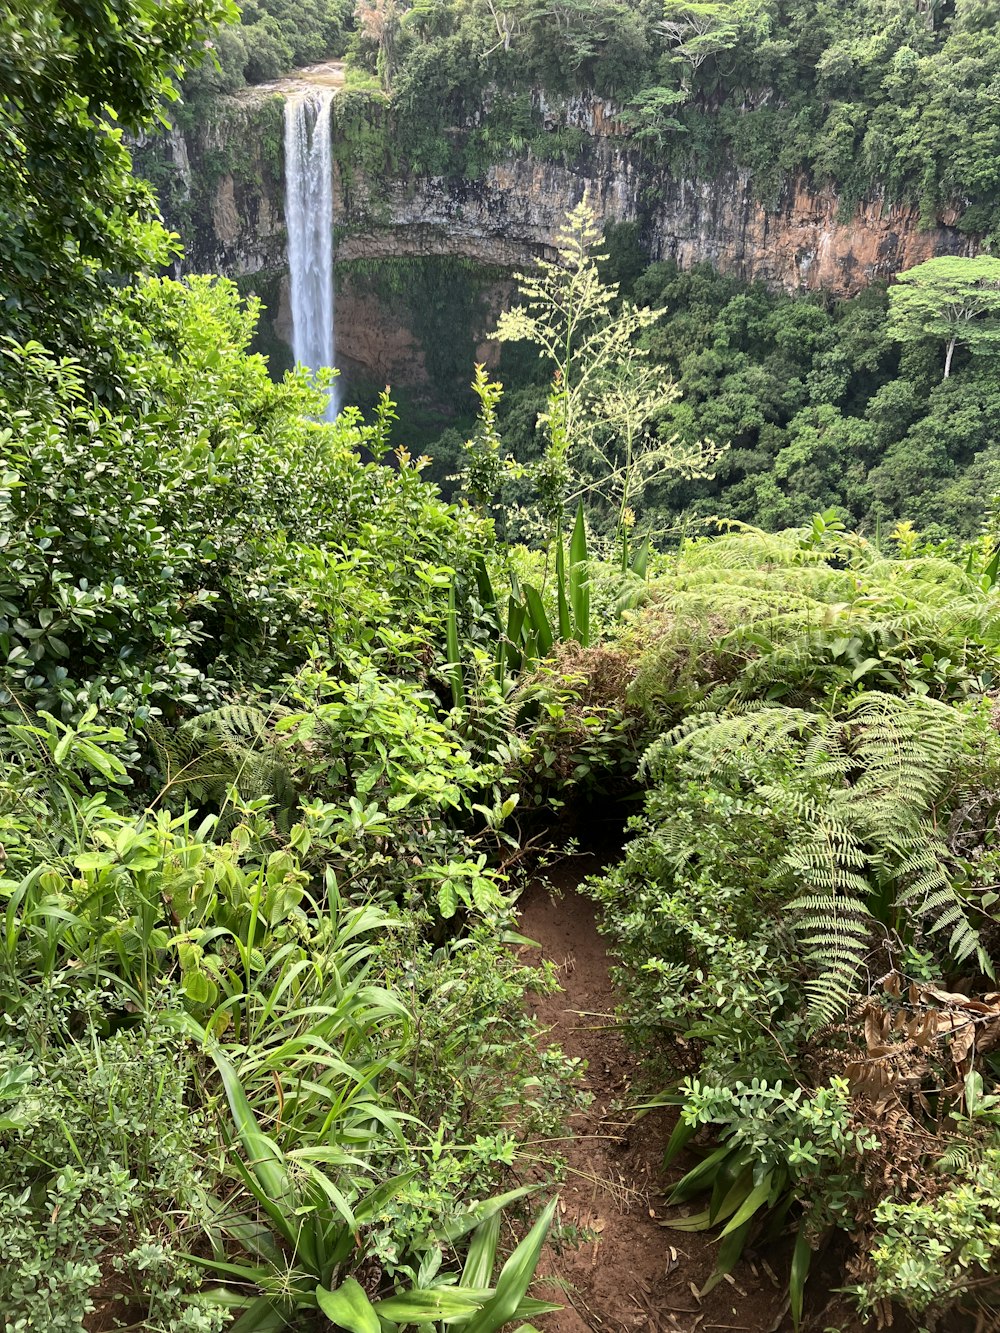 a lush green forest with a waterfall in the background